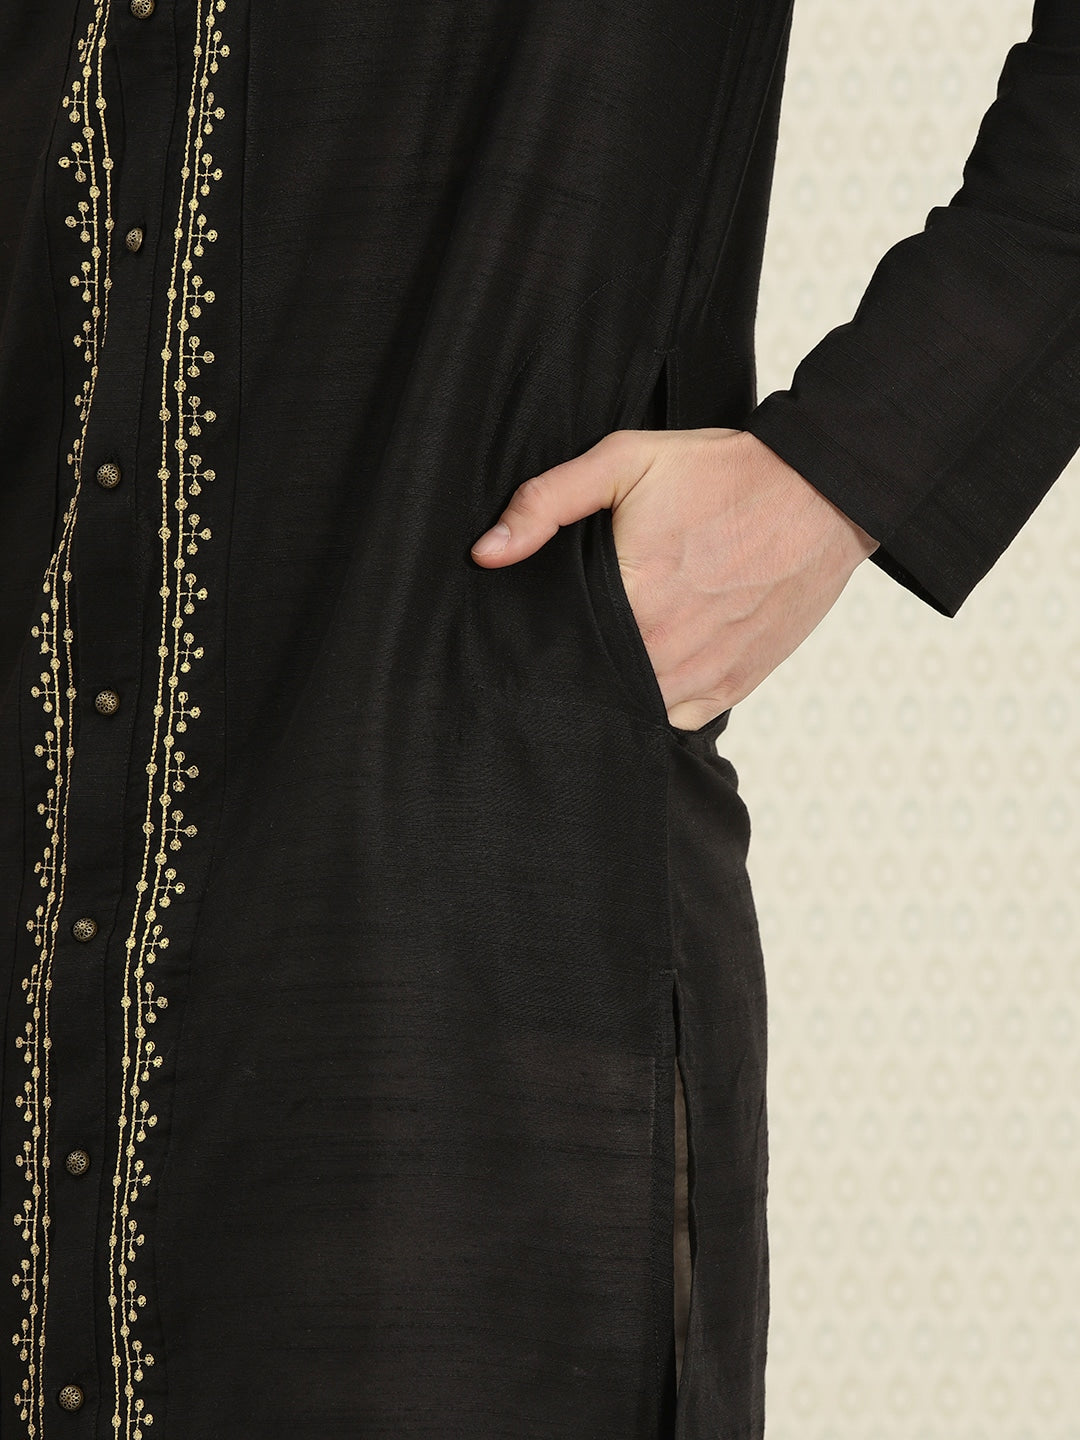 Black & Gold Kurta Set Indian Clothing in Denver, CO, Aurora, CO, Boulder, CO, Fort Collins, CO, Colorado Springs, CO, Parker, CO, Highlands Ranch, CO, Cherry Creek, CO, Centennial, CO, and Longmont, CO. NATIONWIDE SHIPPING USA- India Fashion X